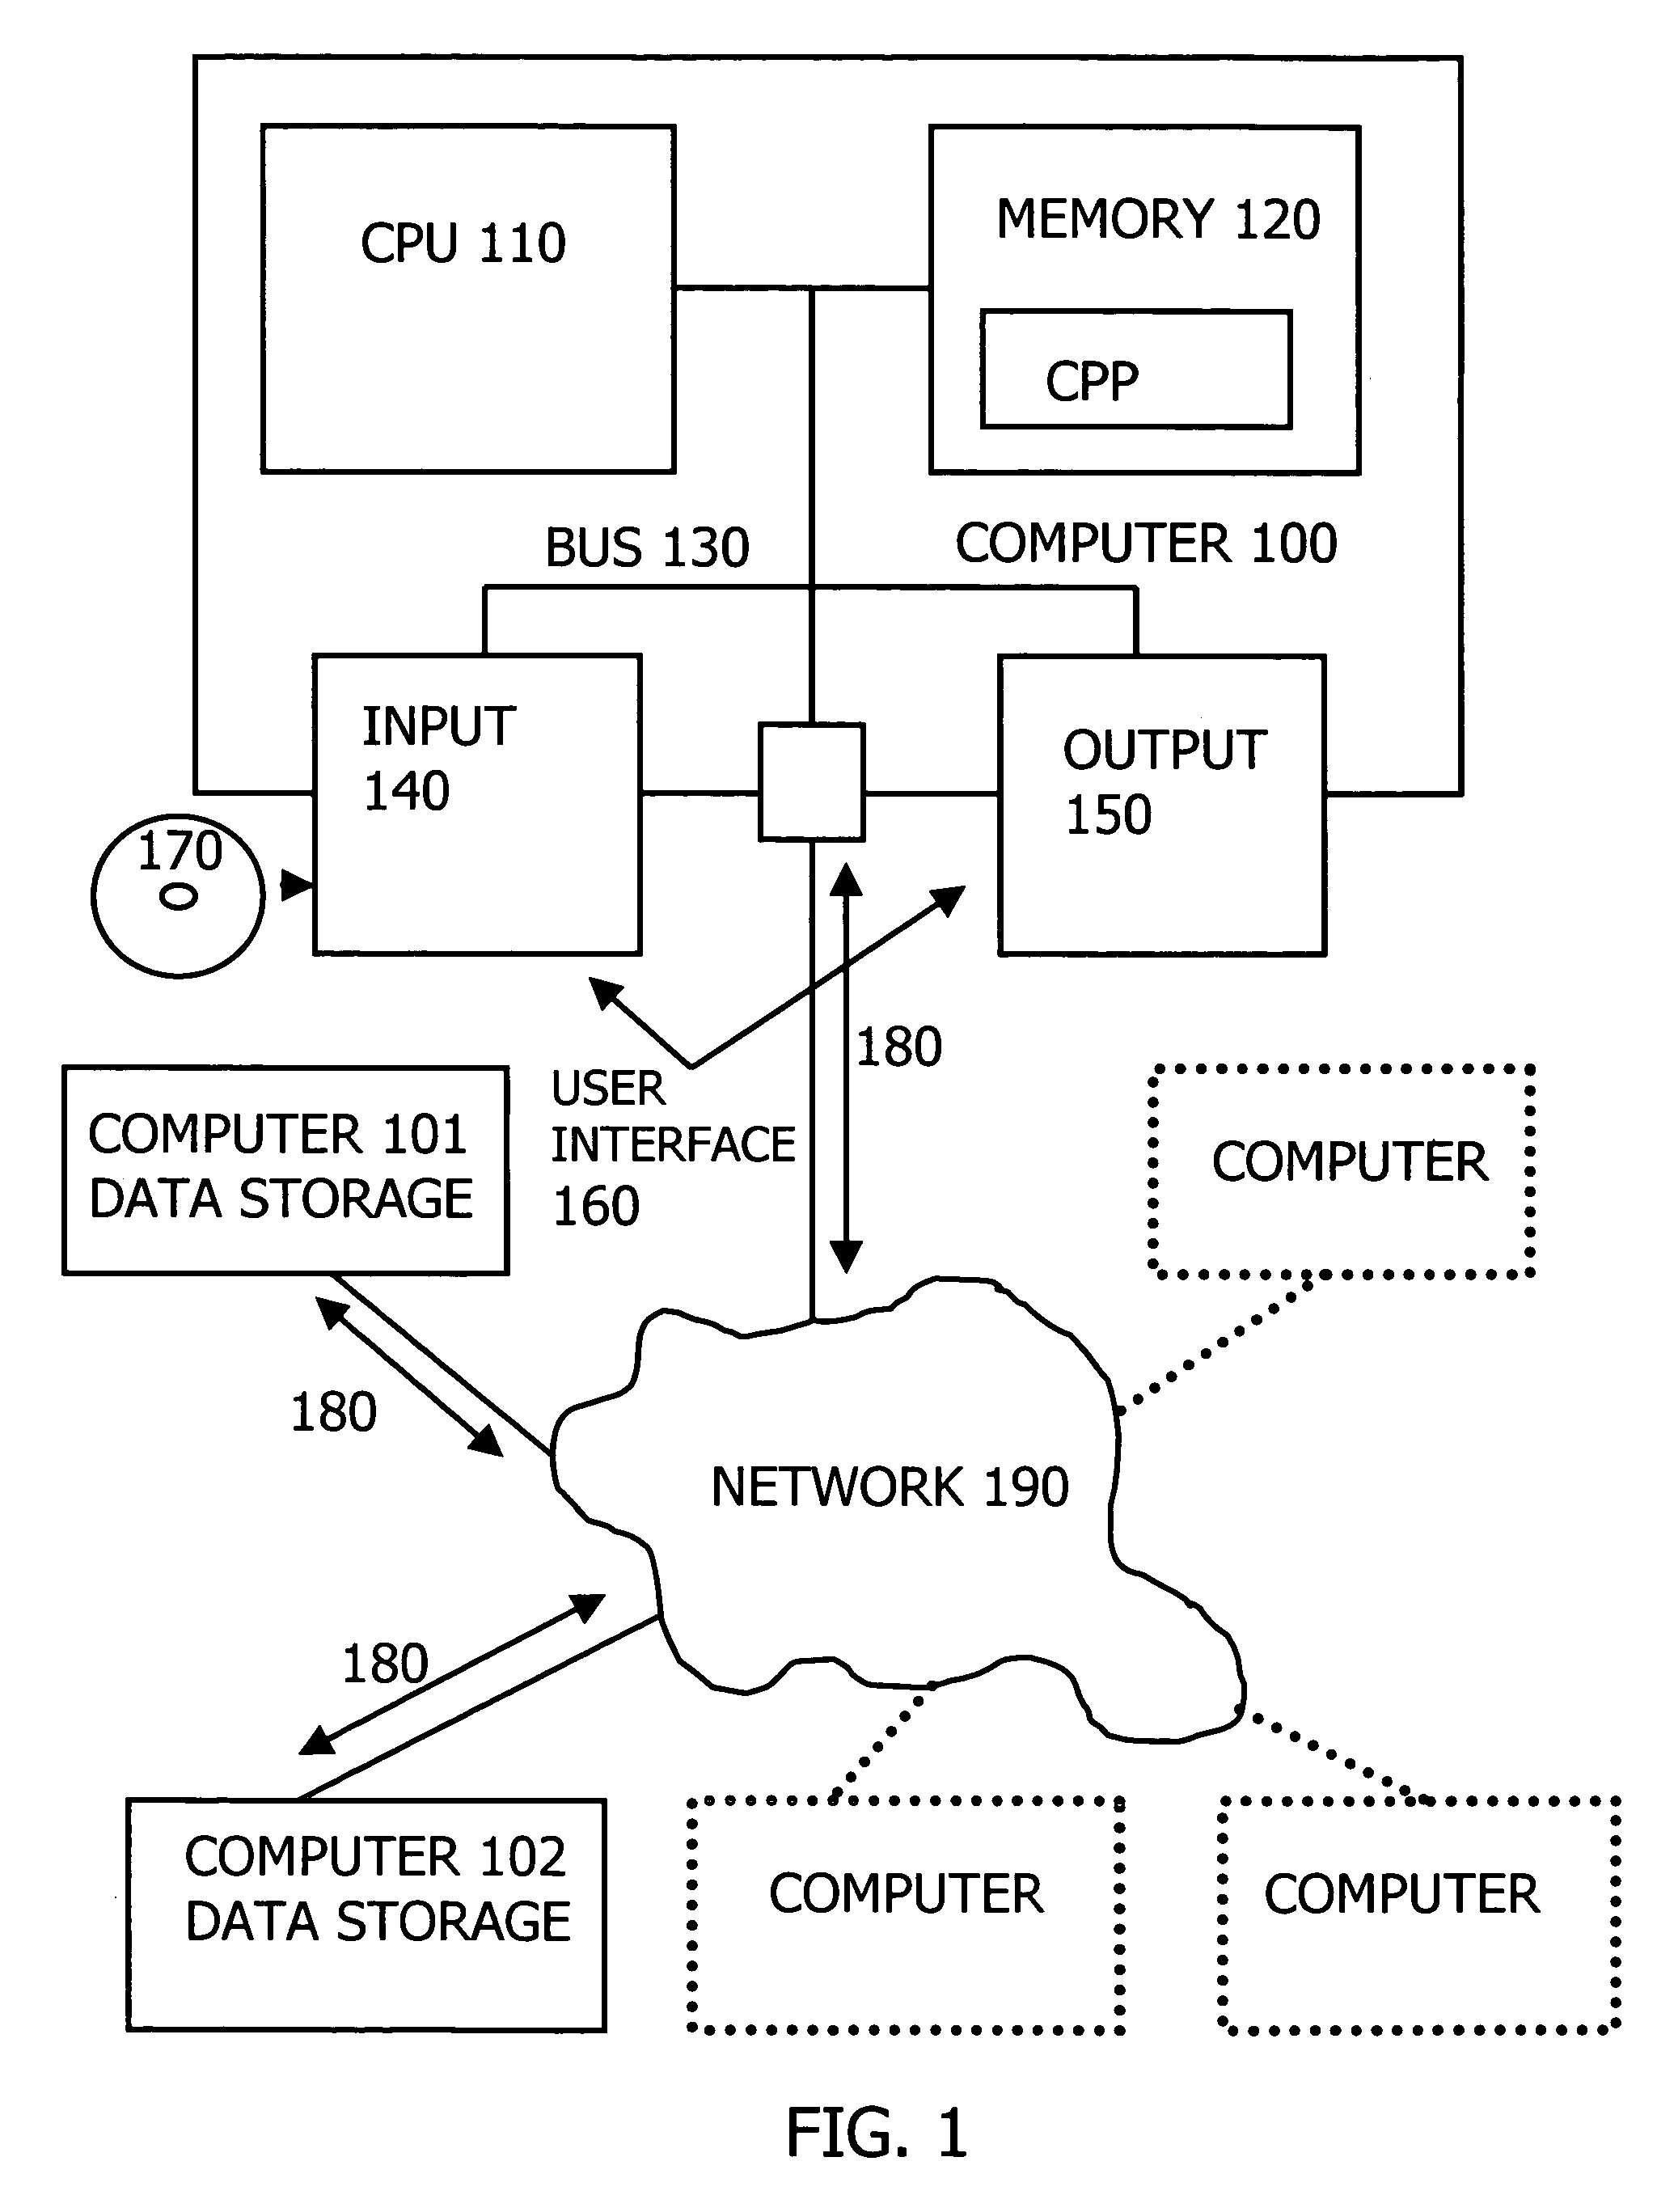 Processing of data sets in a computer network